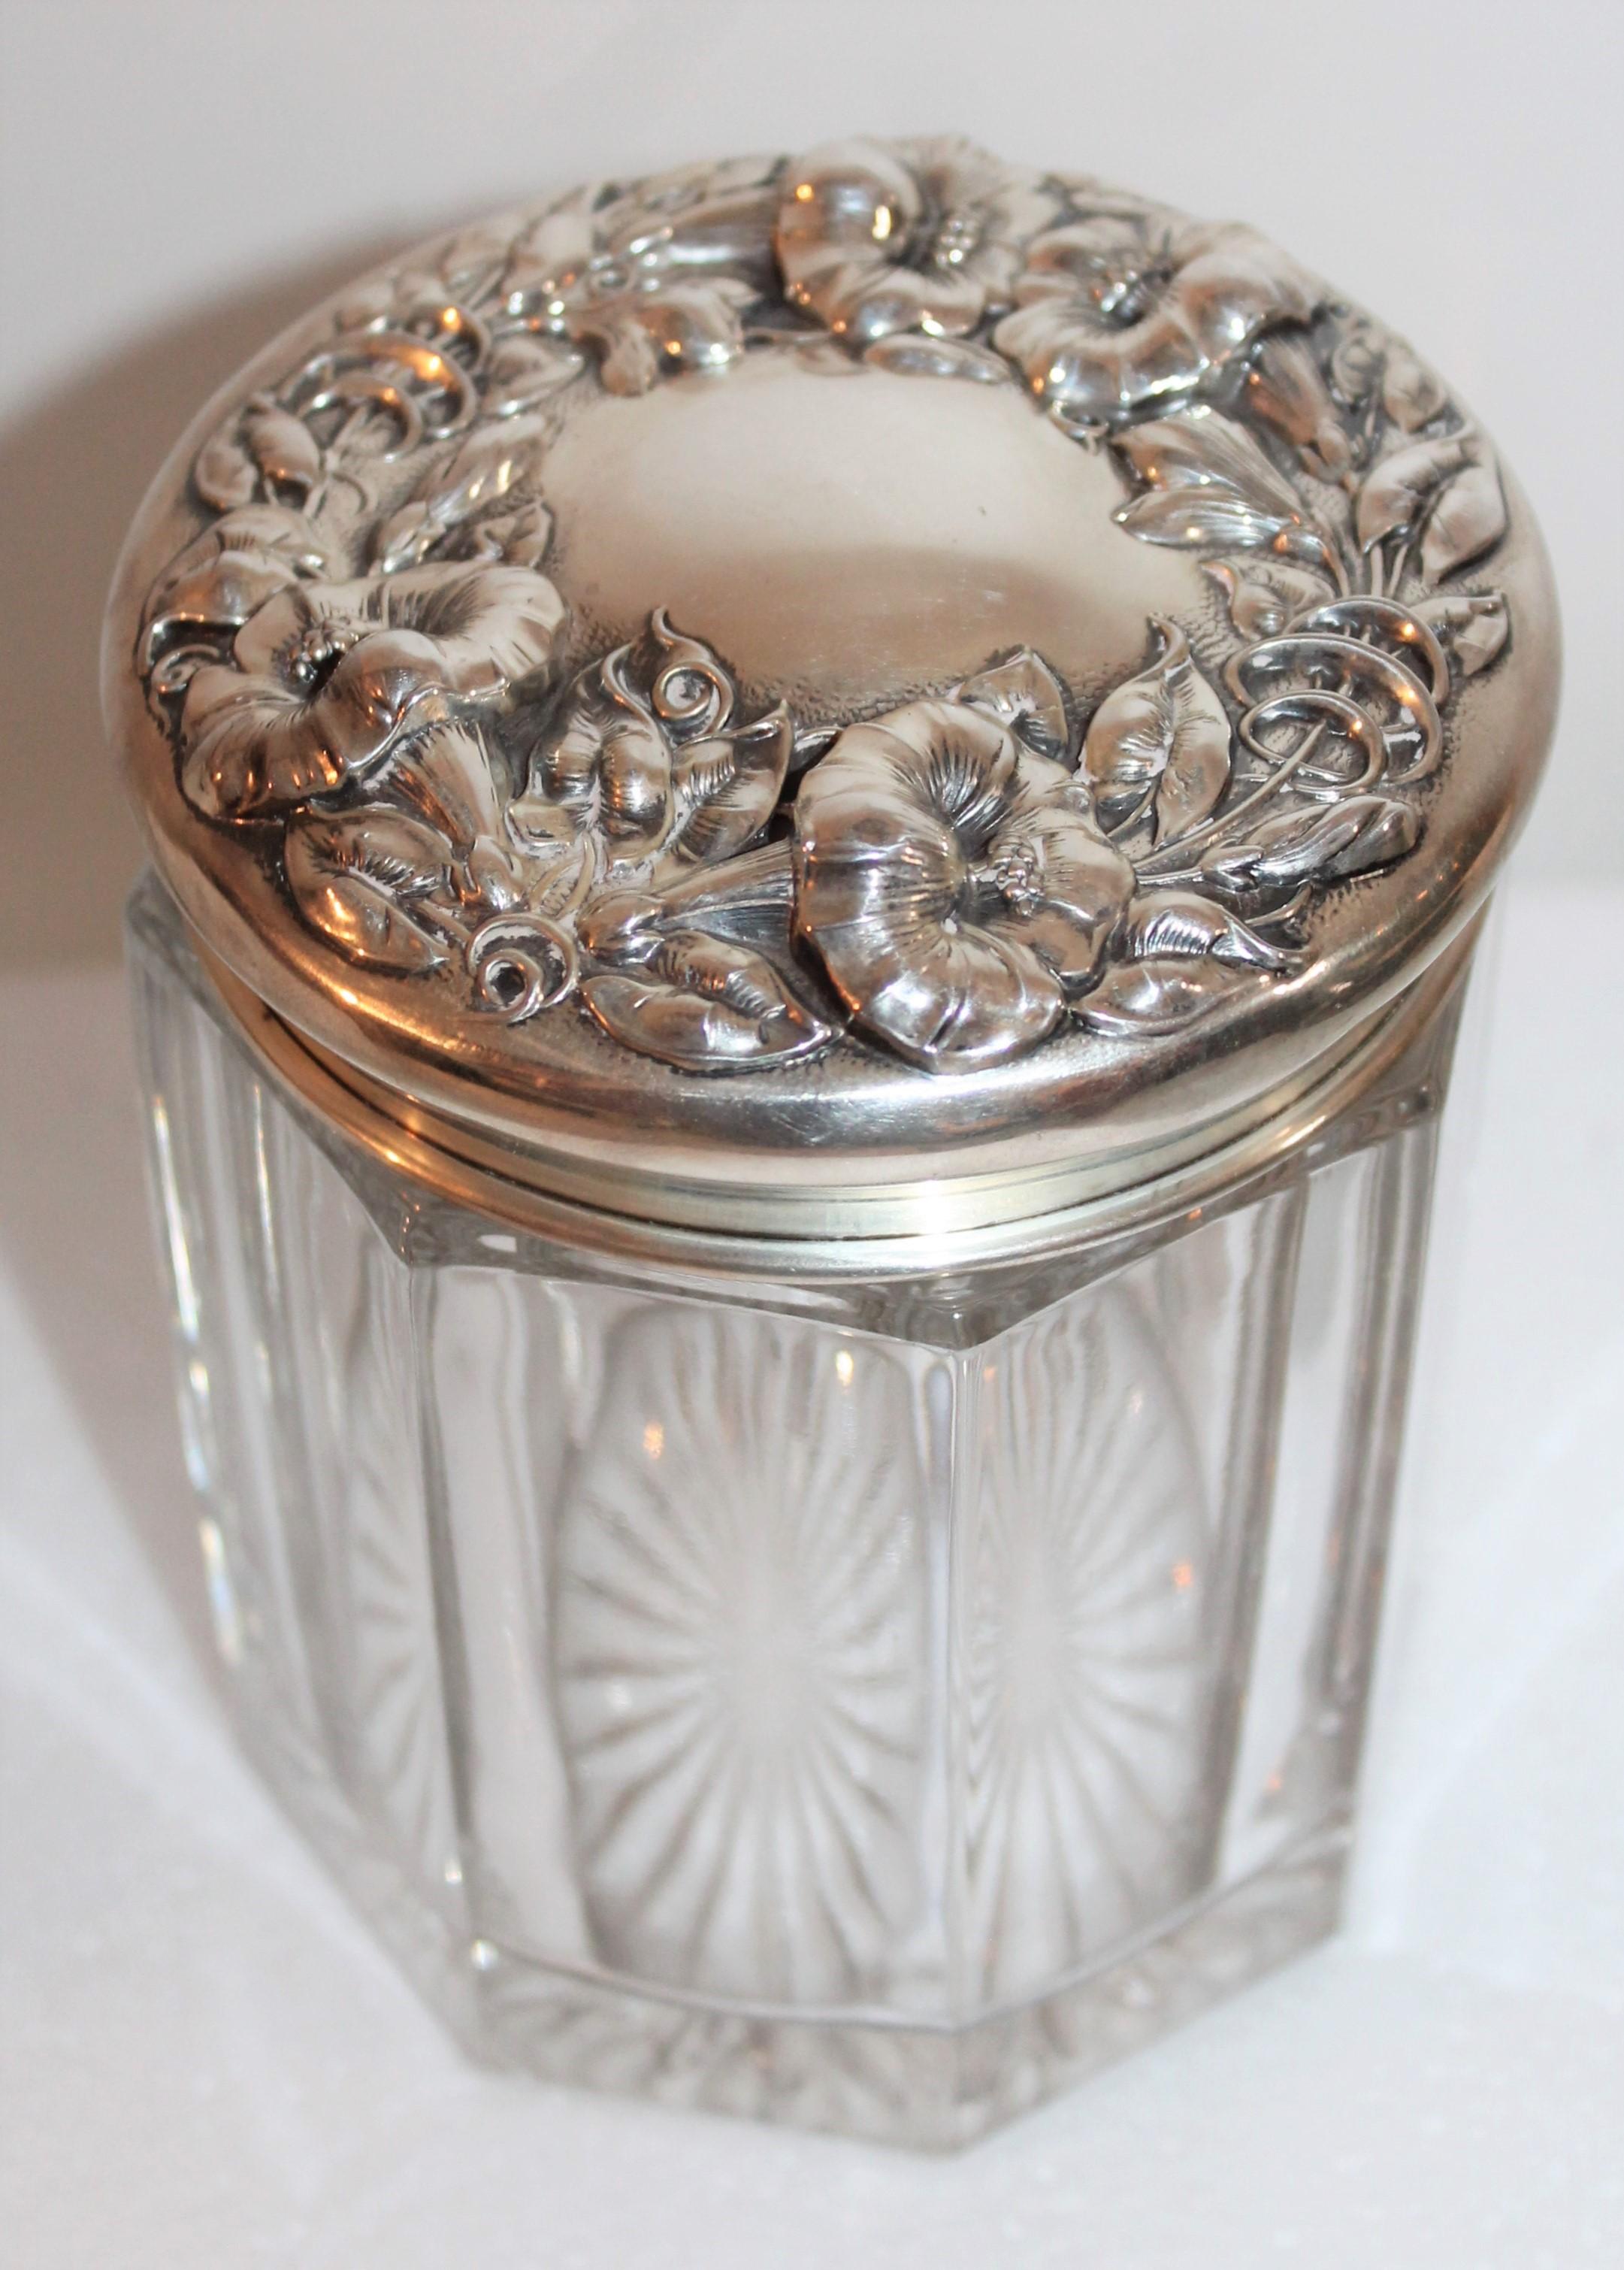 This fine sterling silver lidded jar has a crystal glass base. The condition is pristine. The inside lid has a 24-karat gold wash and is signed sterling. This large jar could be used for many different things as it is tall.